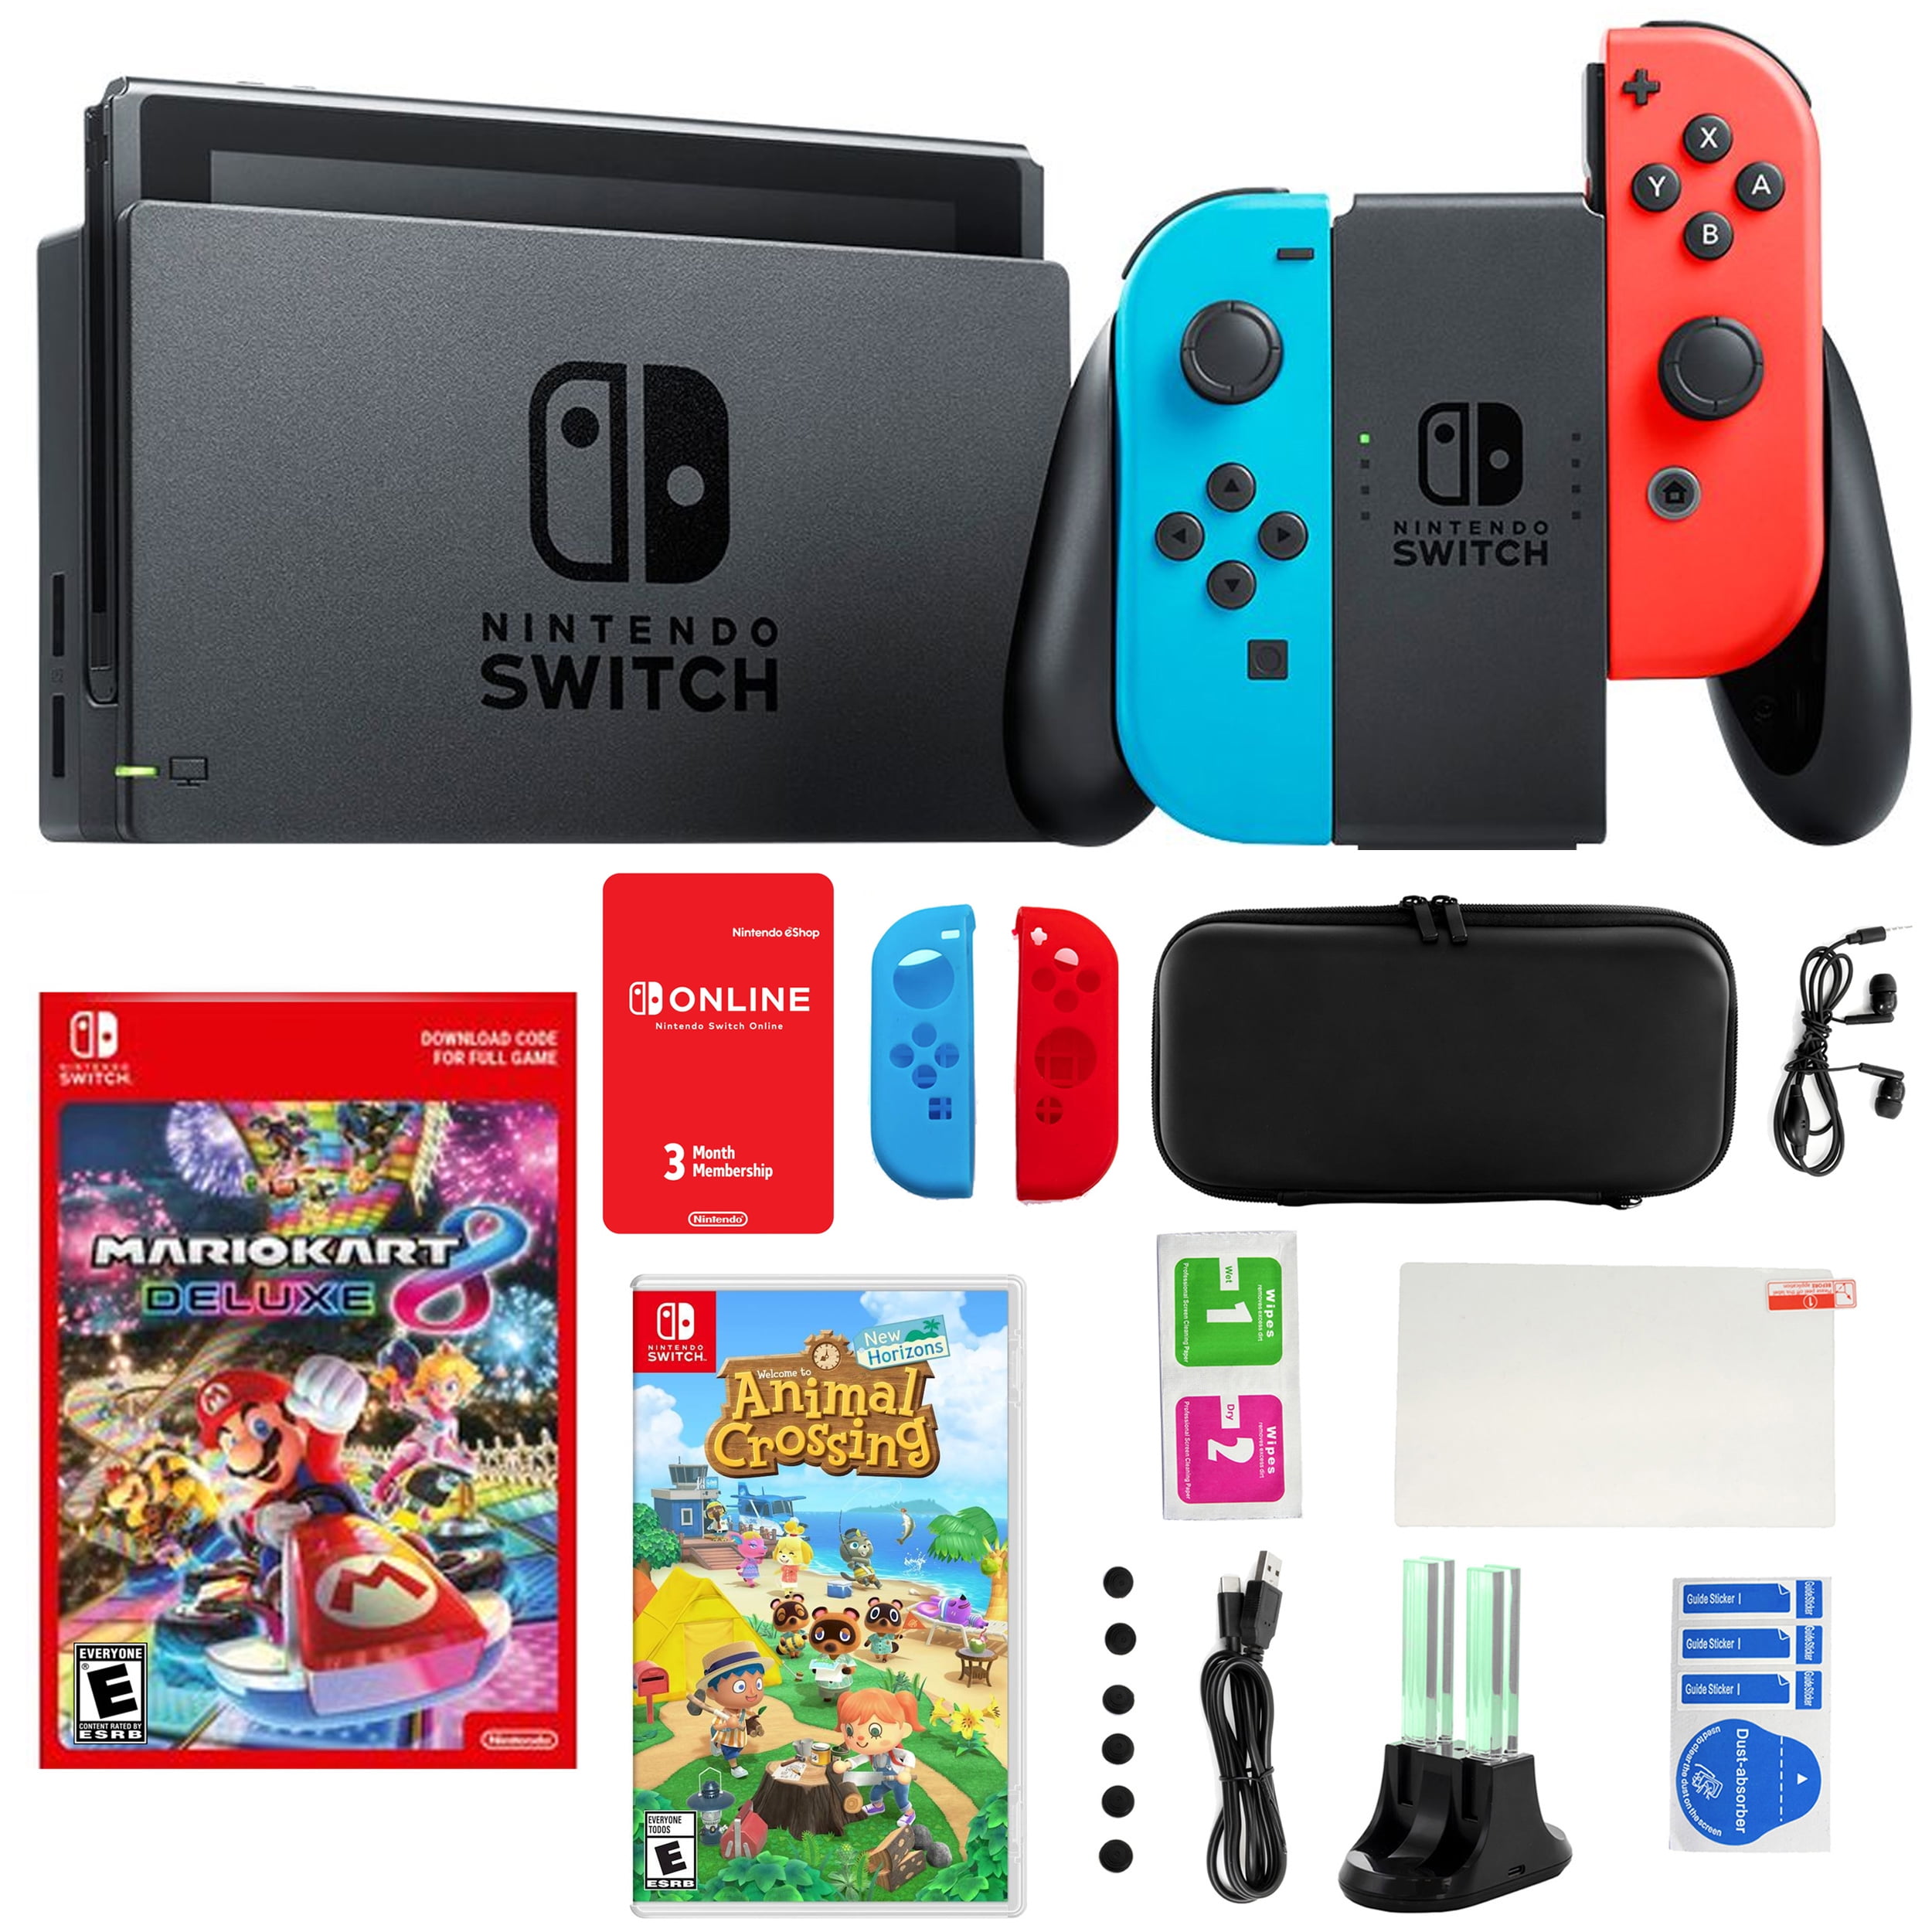 Sex Smaal Girls Free Download On Memorycard - 2022 Newest Ninteno Switch Animal Crossing Jon-Con Console With NSSCD 32GB  Storage Card, HDMI Cable and 10 in 1 Accessory Case - Walmart.com